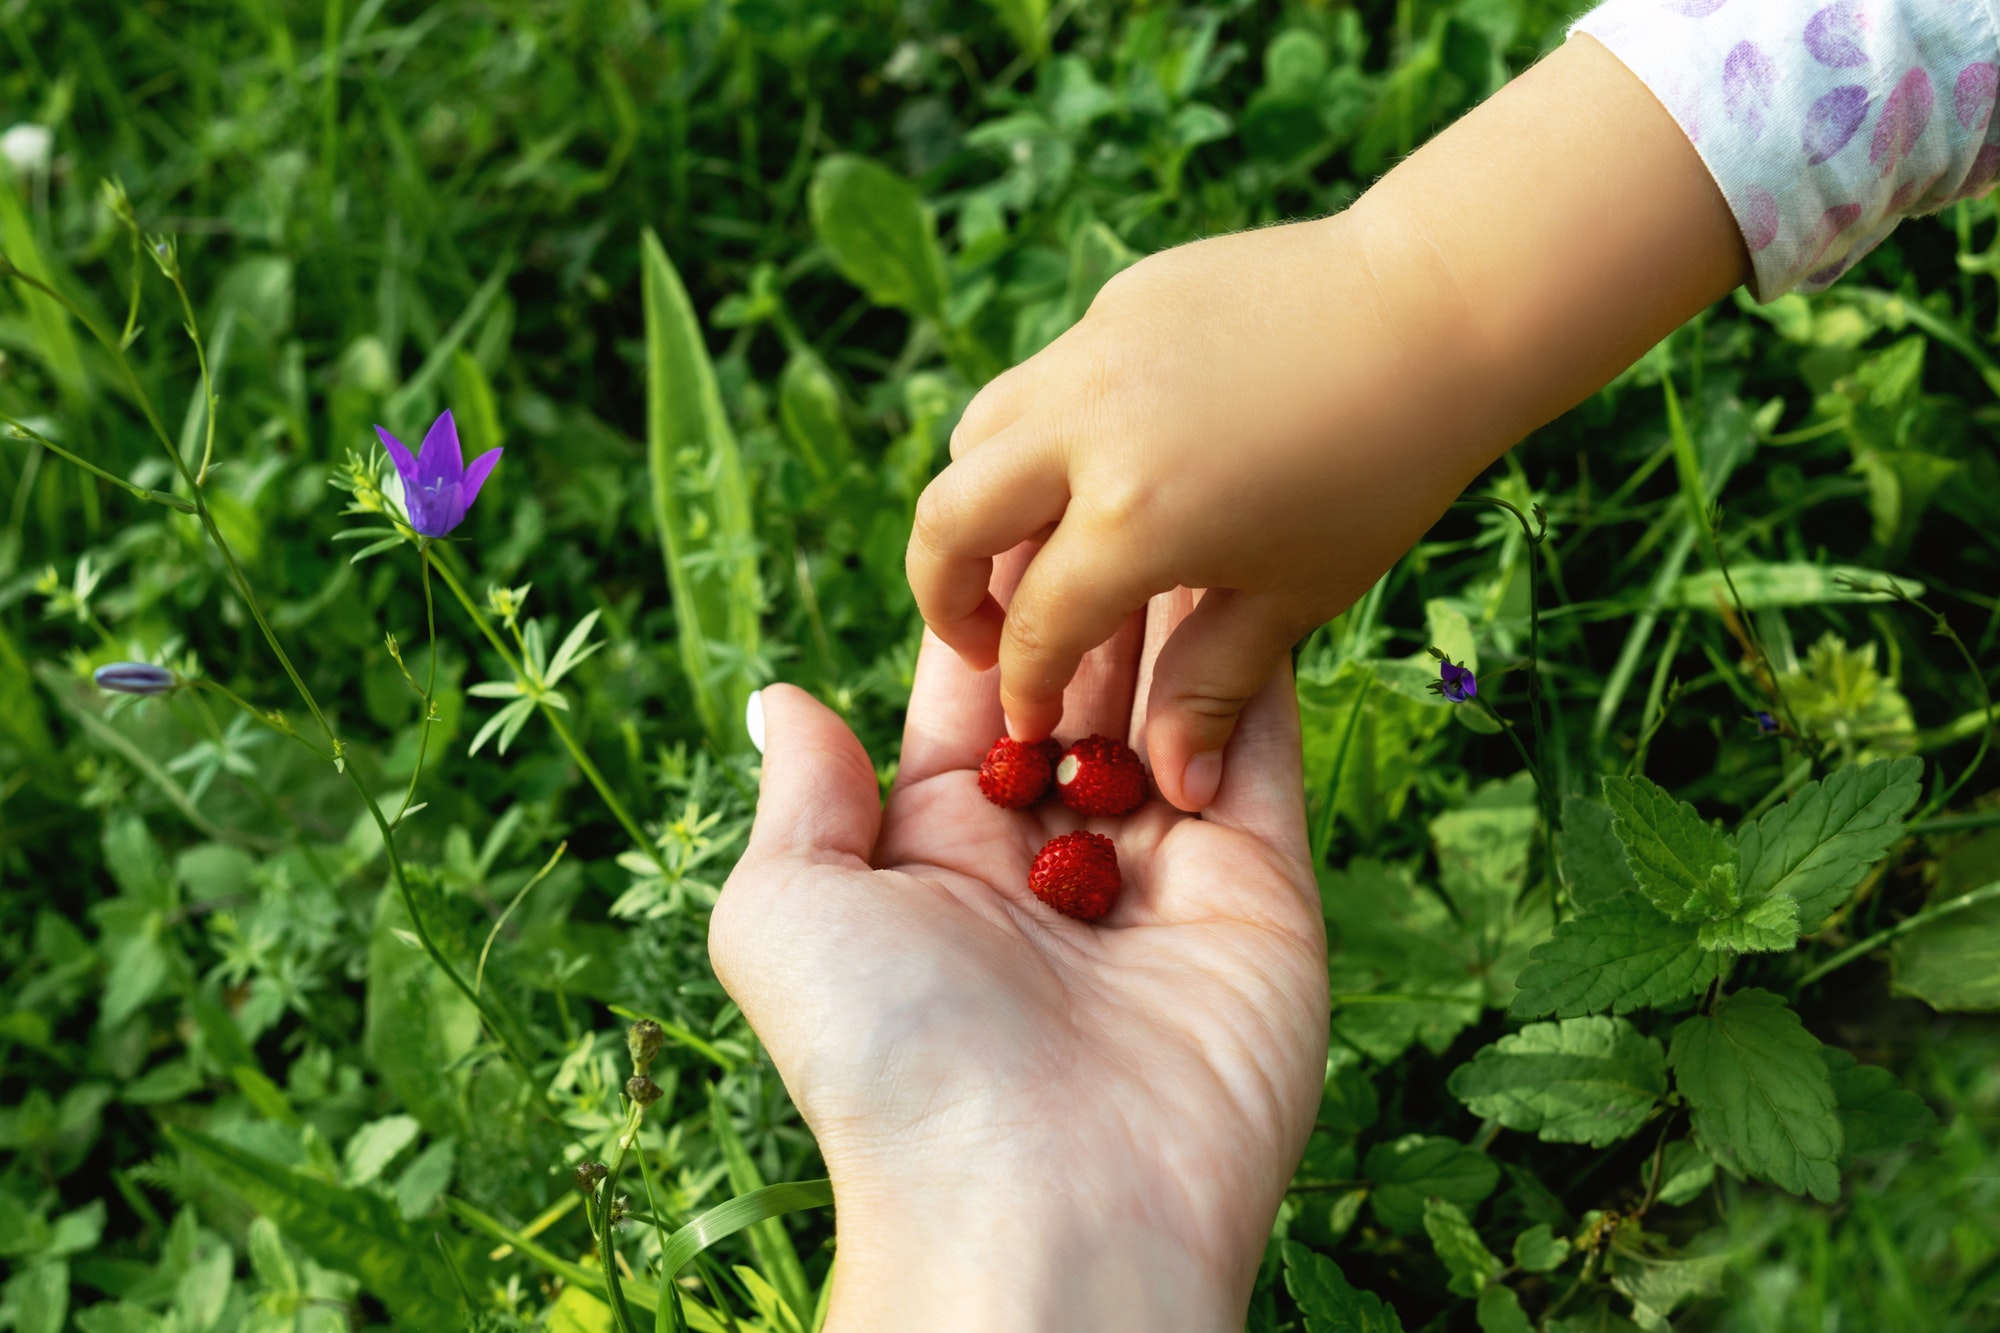 child about to eat healthy berries from mom's hands